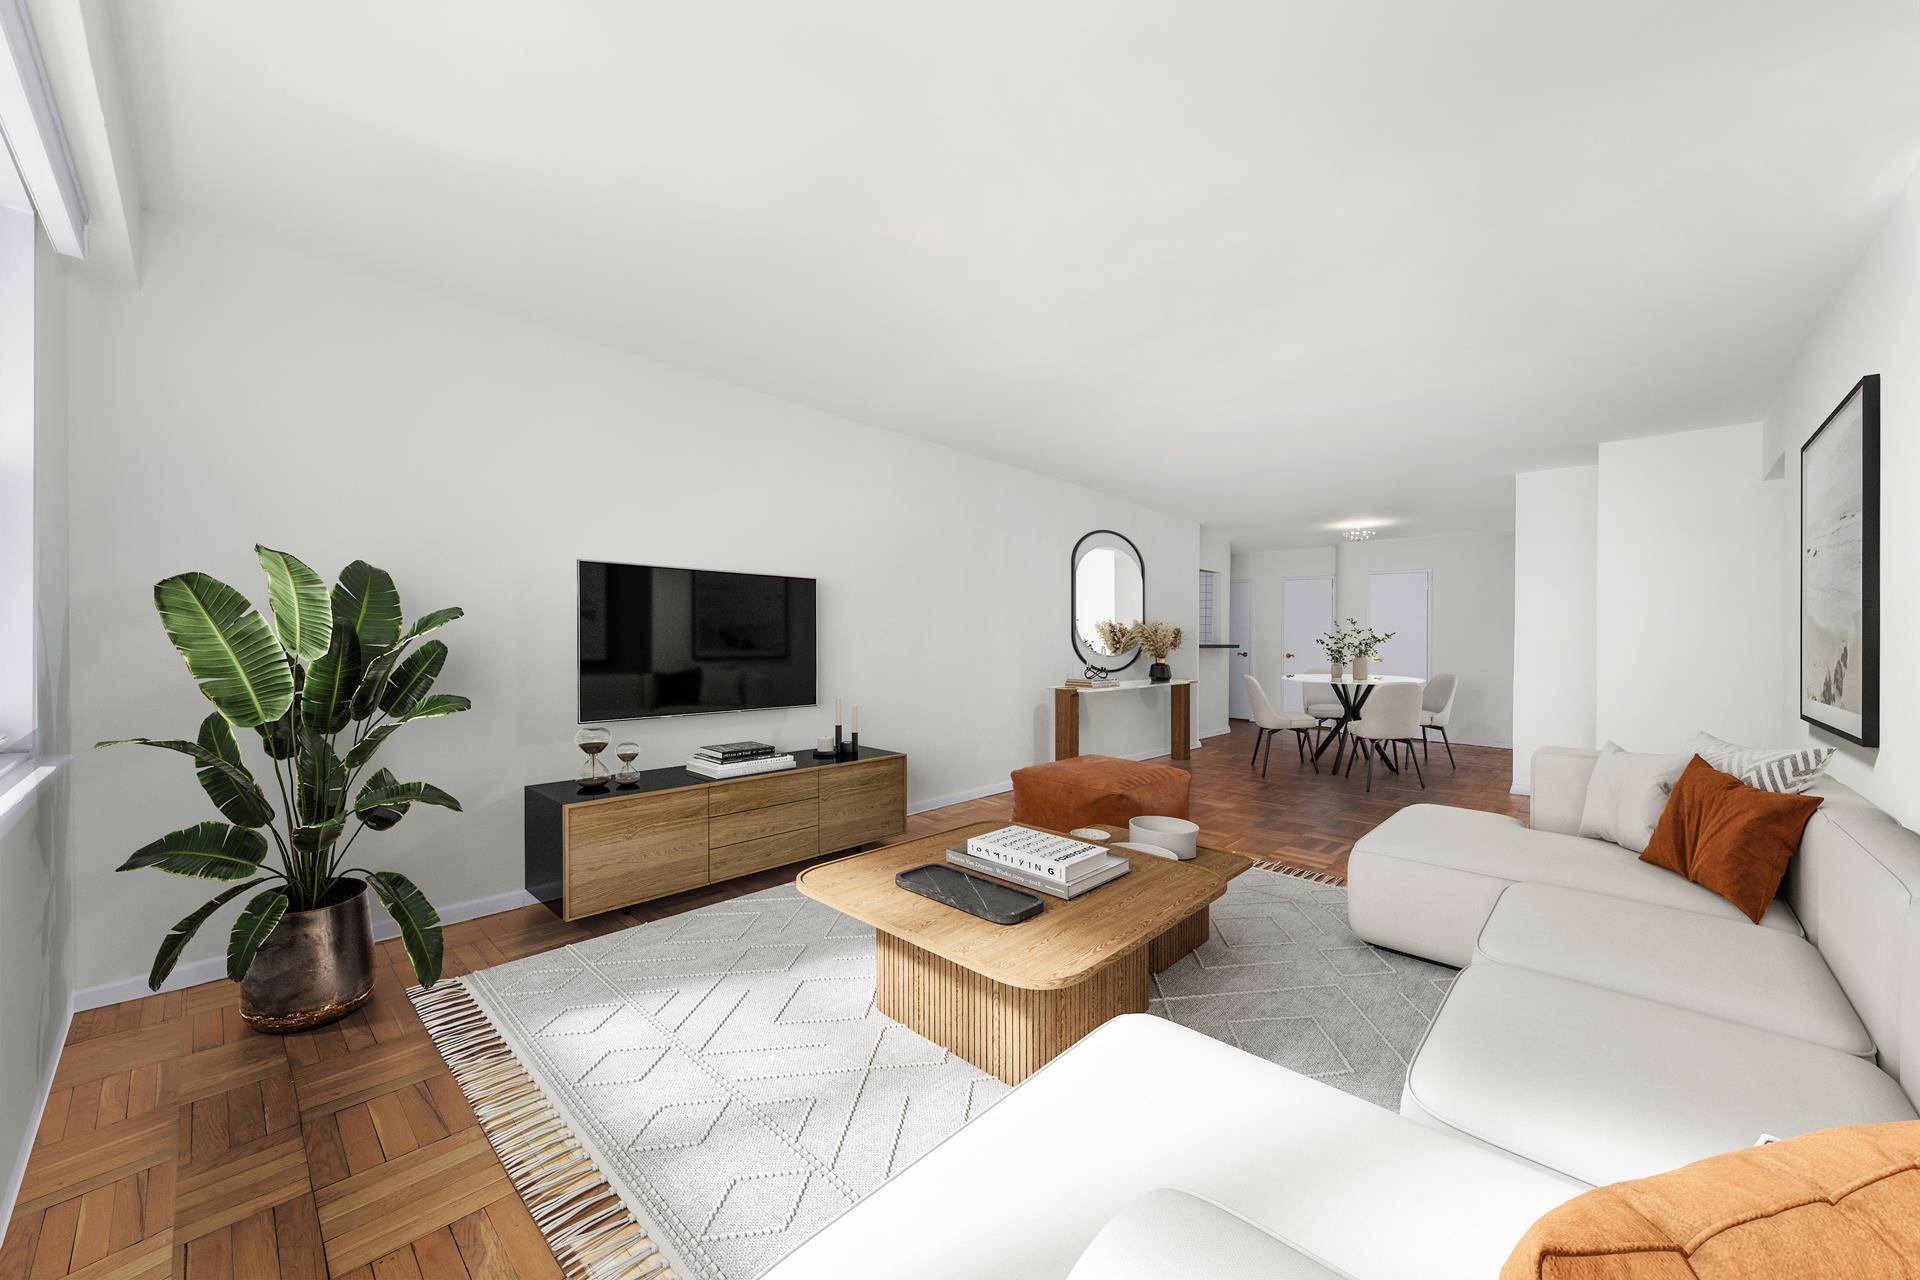 Introducing 8J at 101 West 12th Street A perfect 2 bedroom, 2 bathroom corner unit at the full service John Adams co op in the heart of West Village !